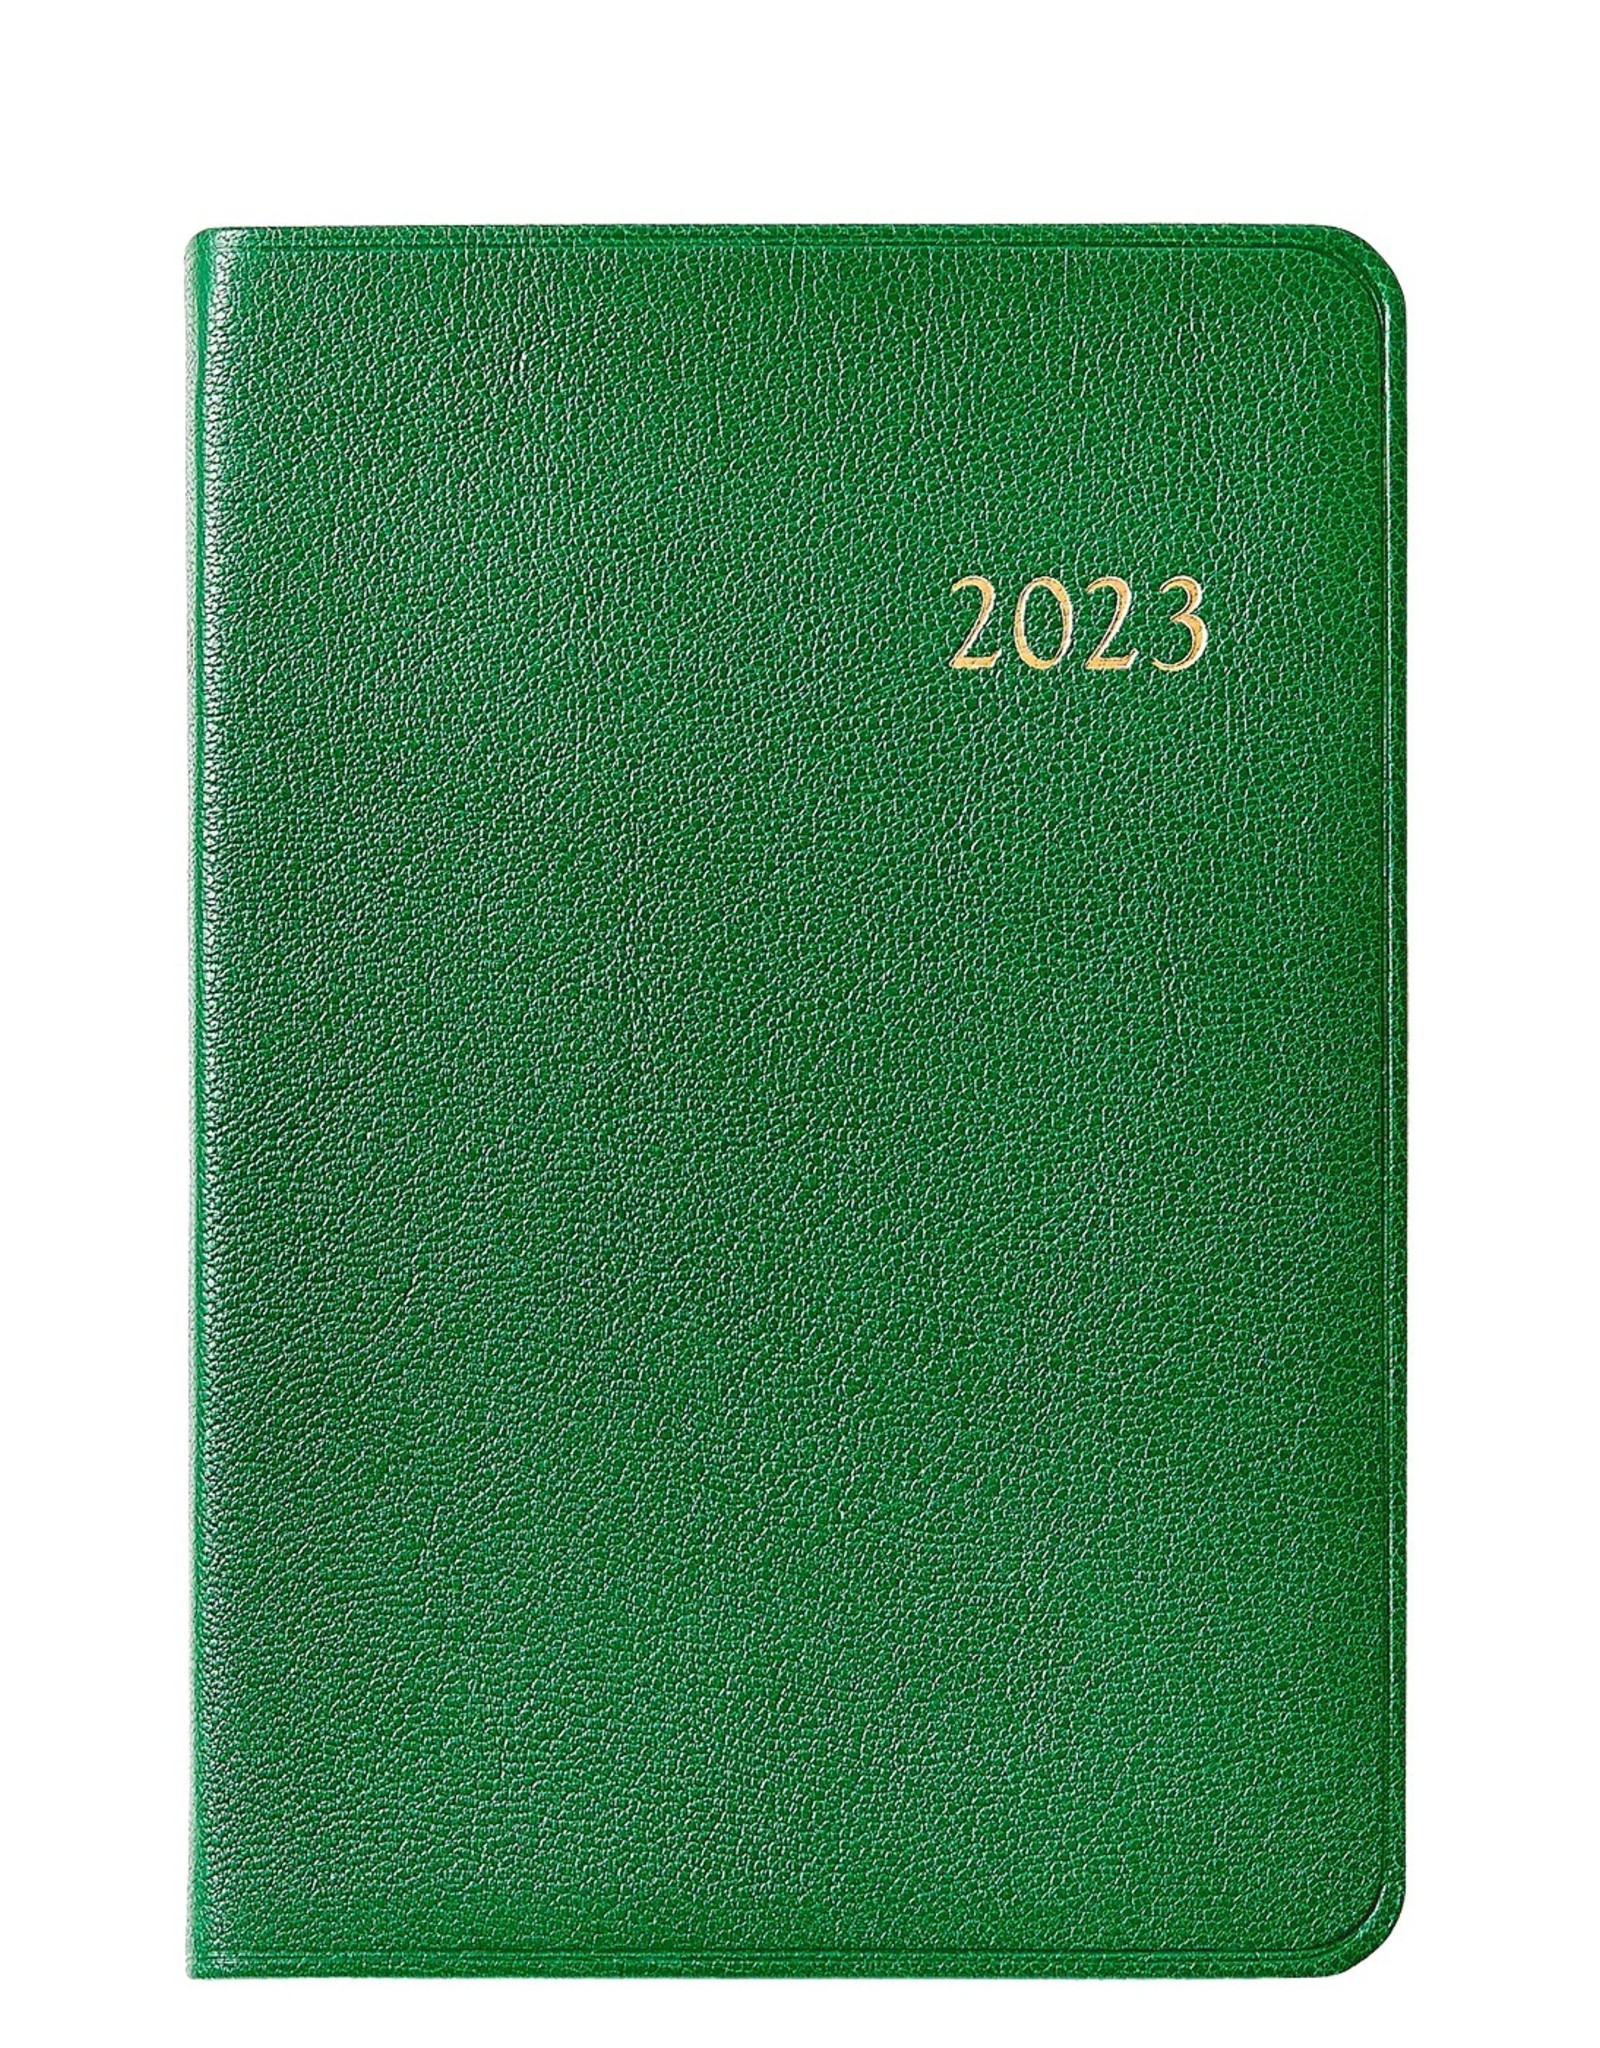 Graphic Image Daily Journal 2023 Emerald Green